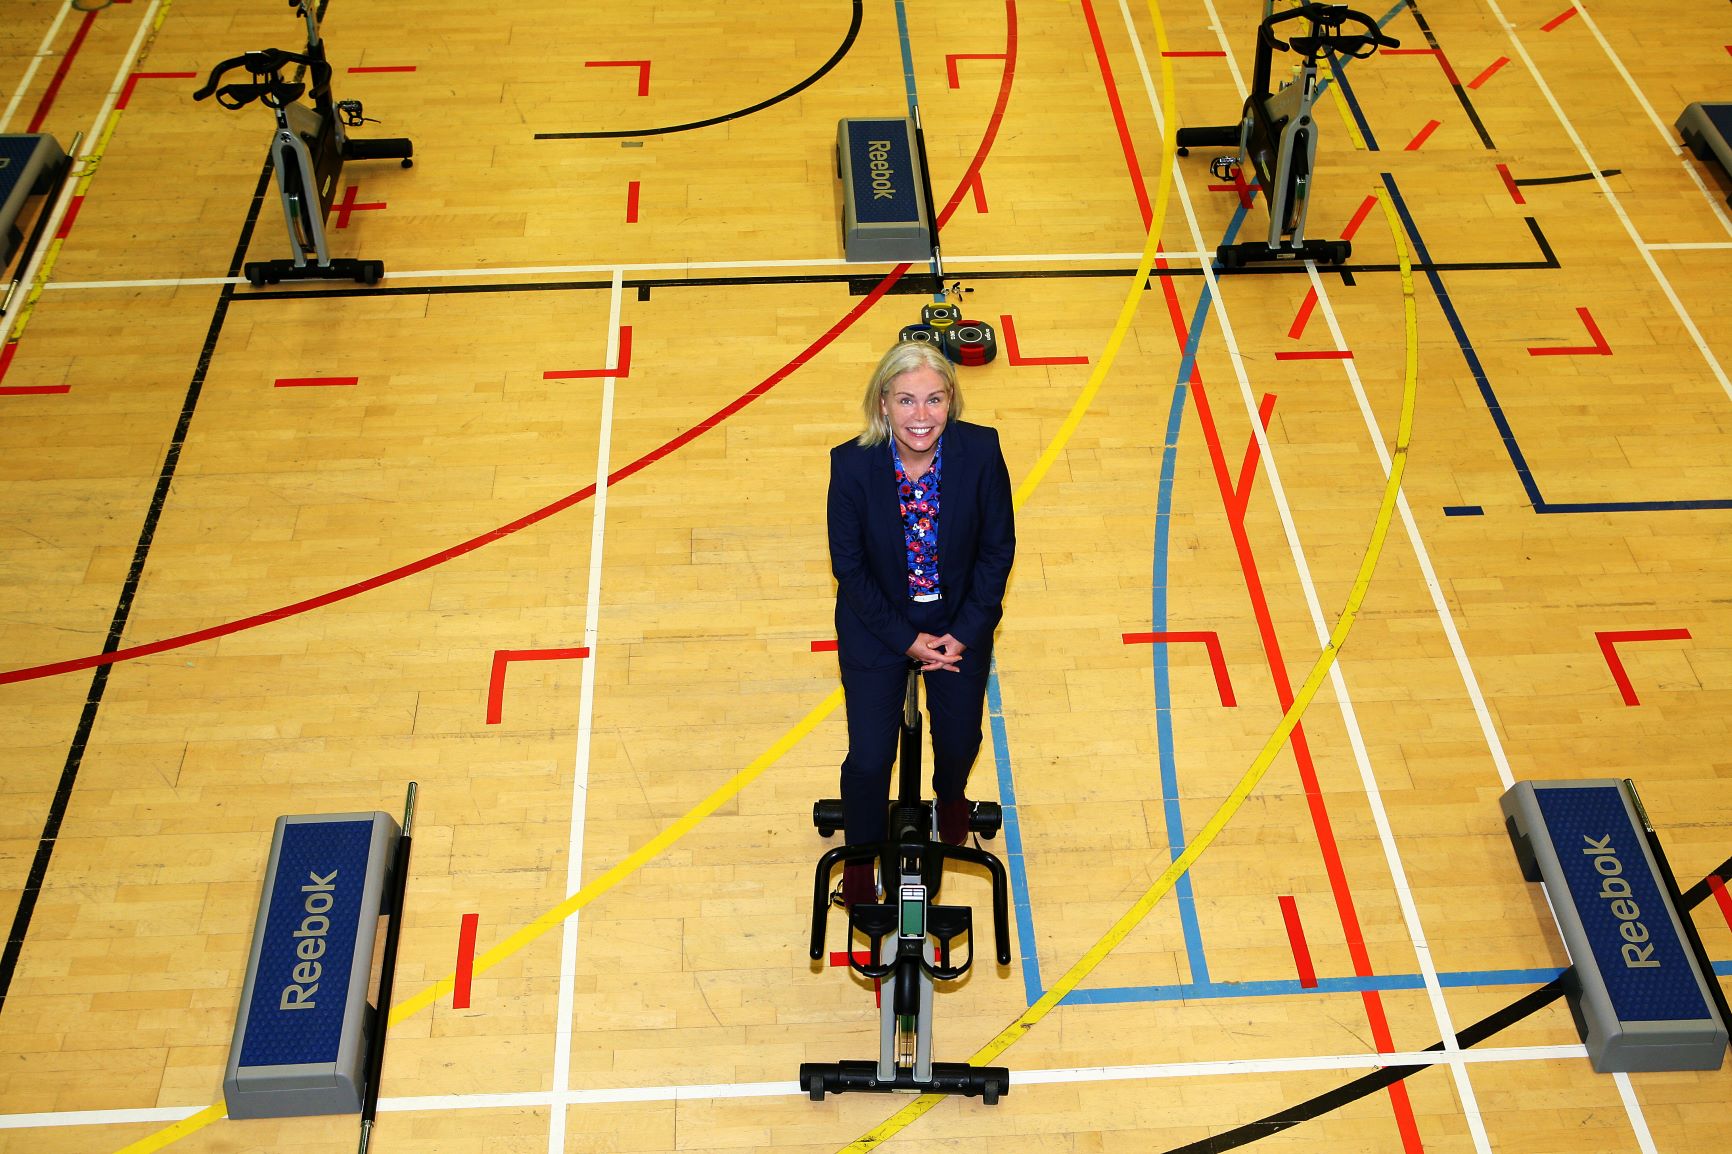 Emma Walker demonstrating new social distancing measures at one of Fife's leisure centres.